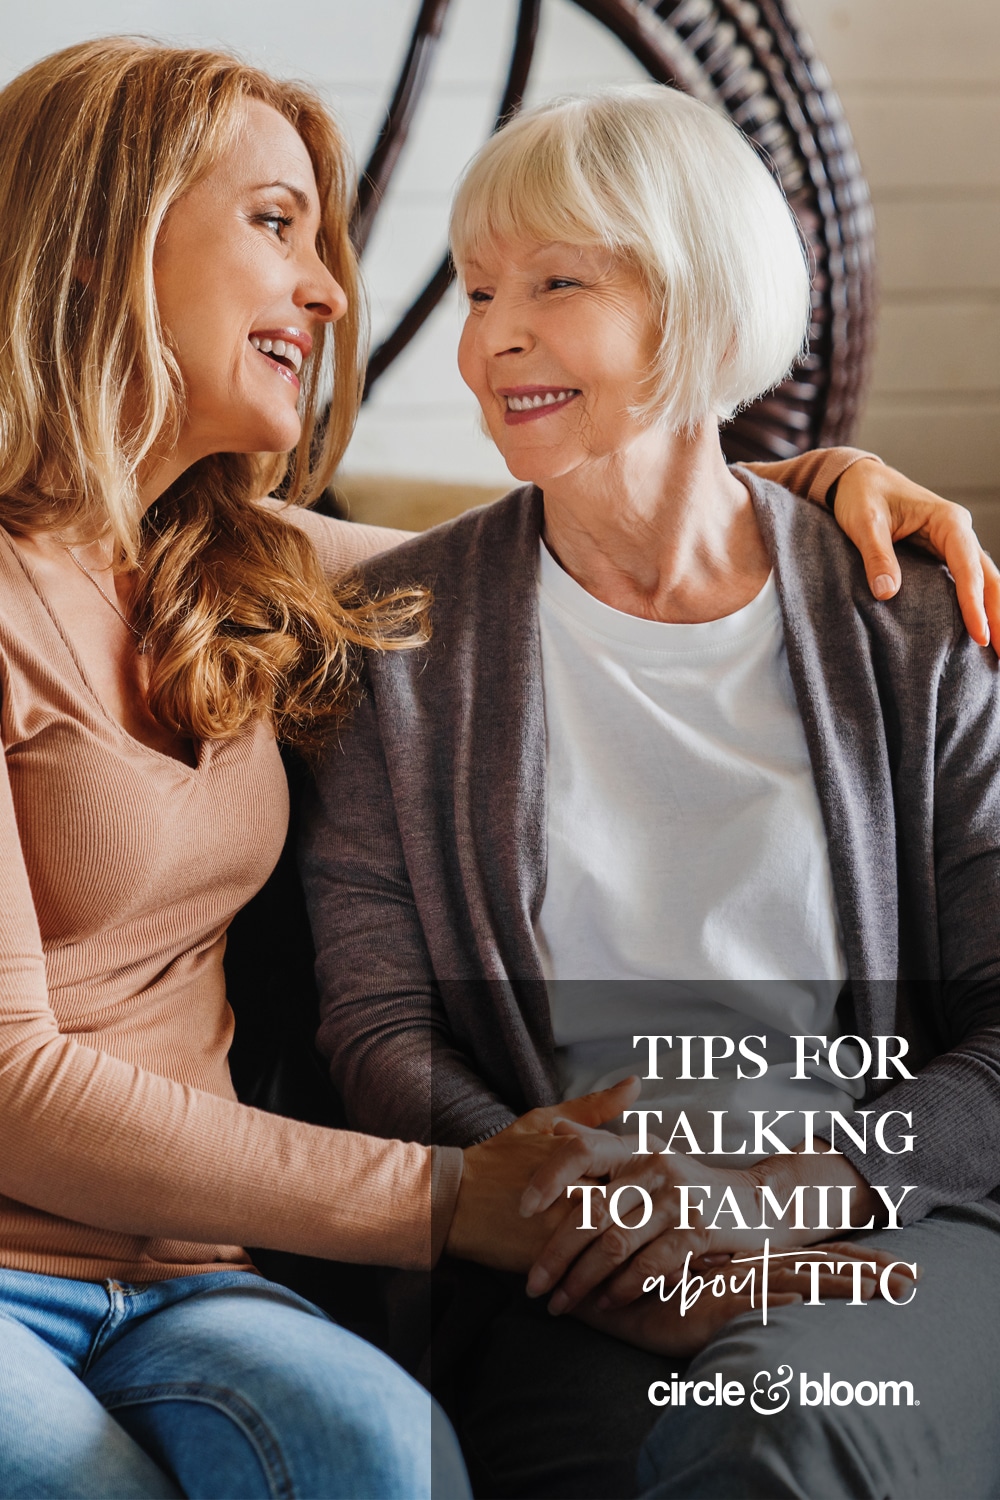 Tips for Talking to Family about TTC